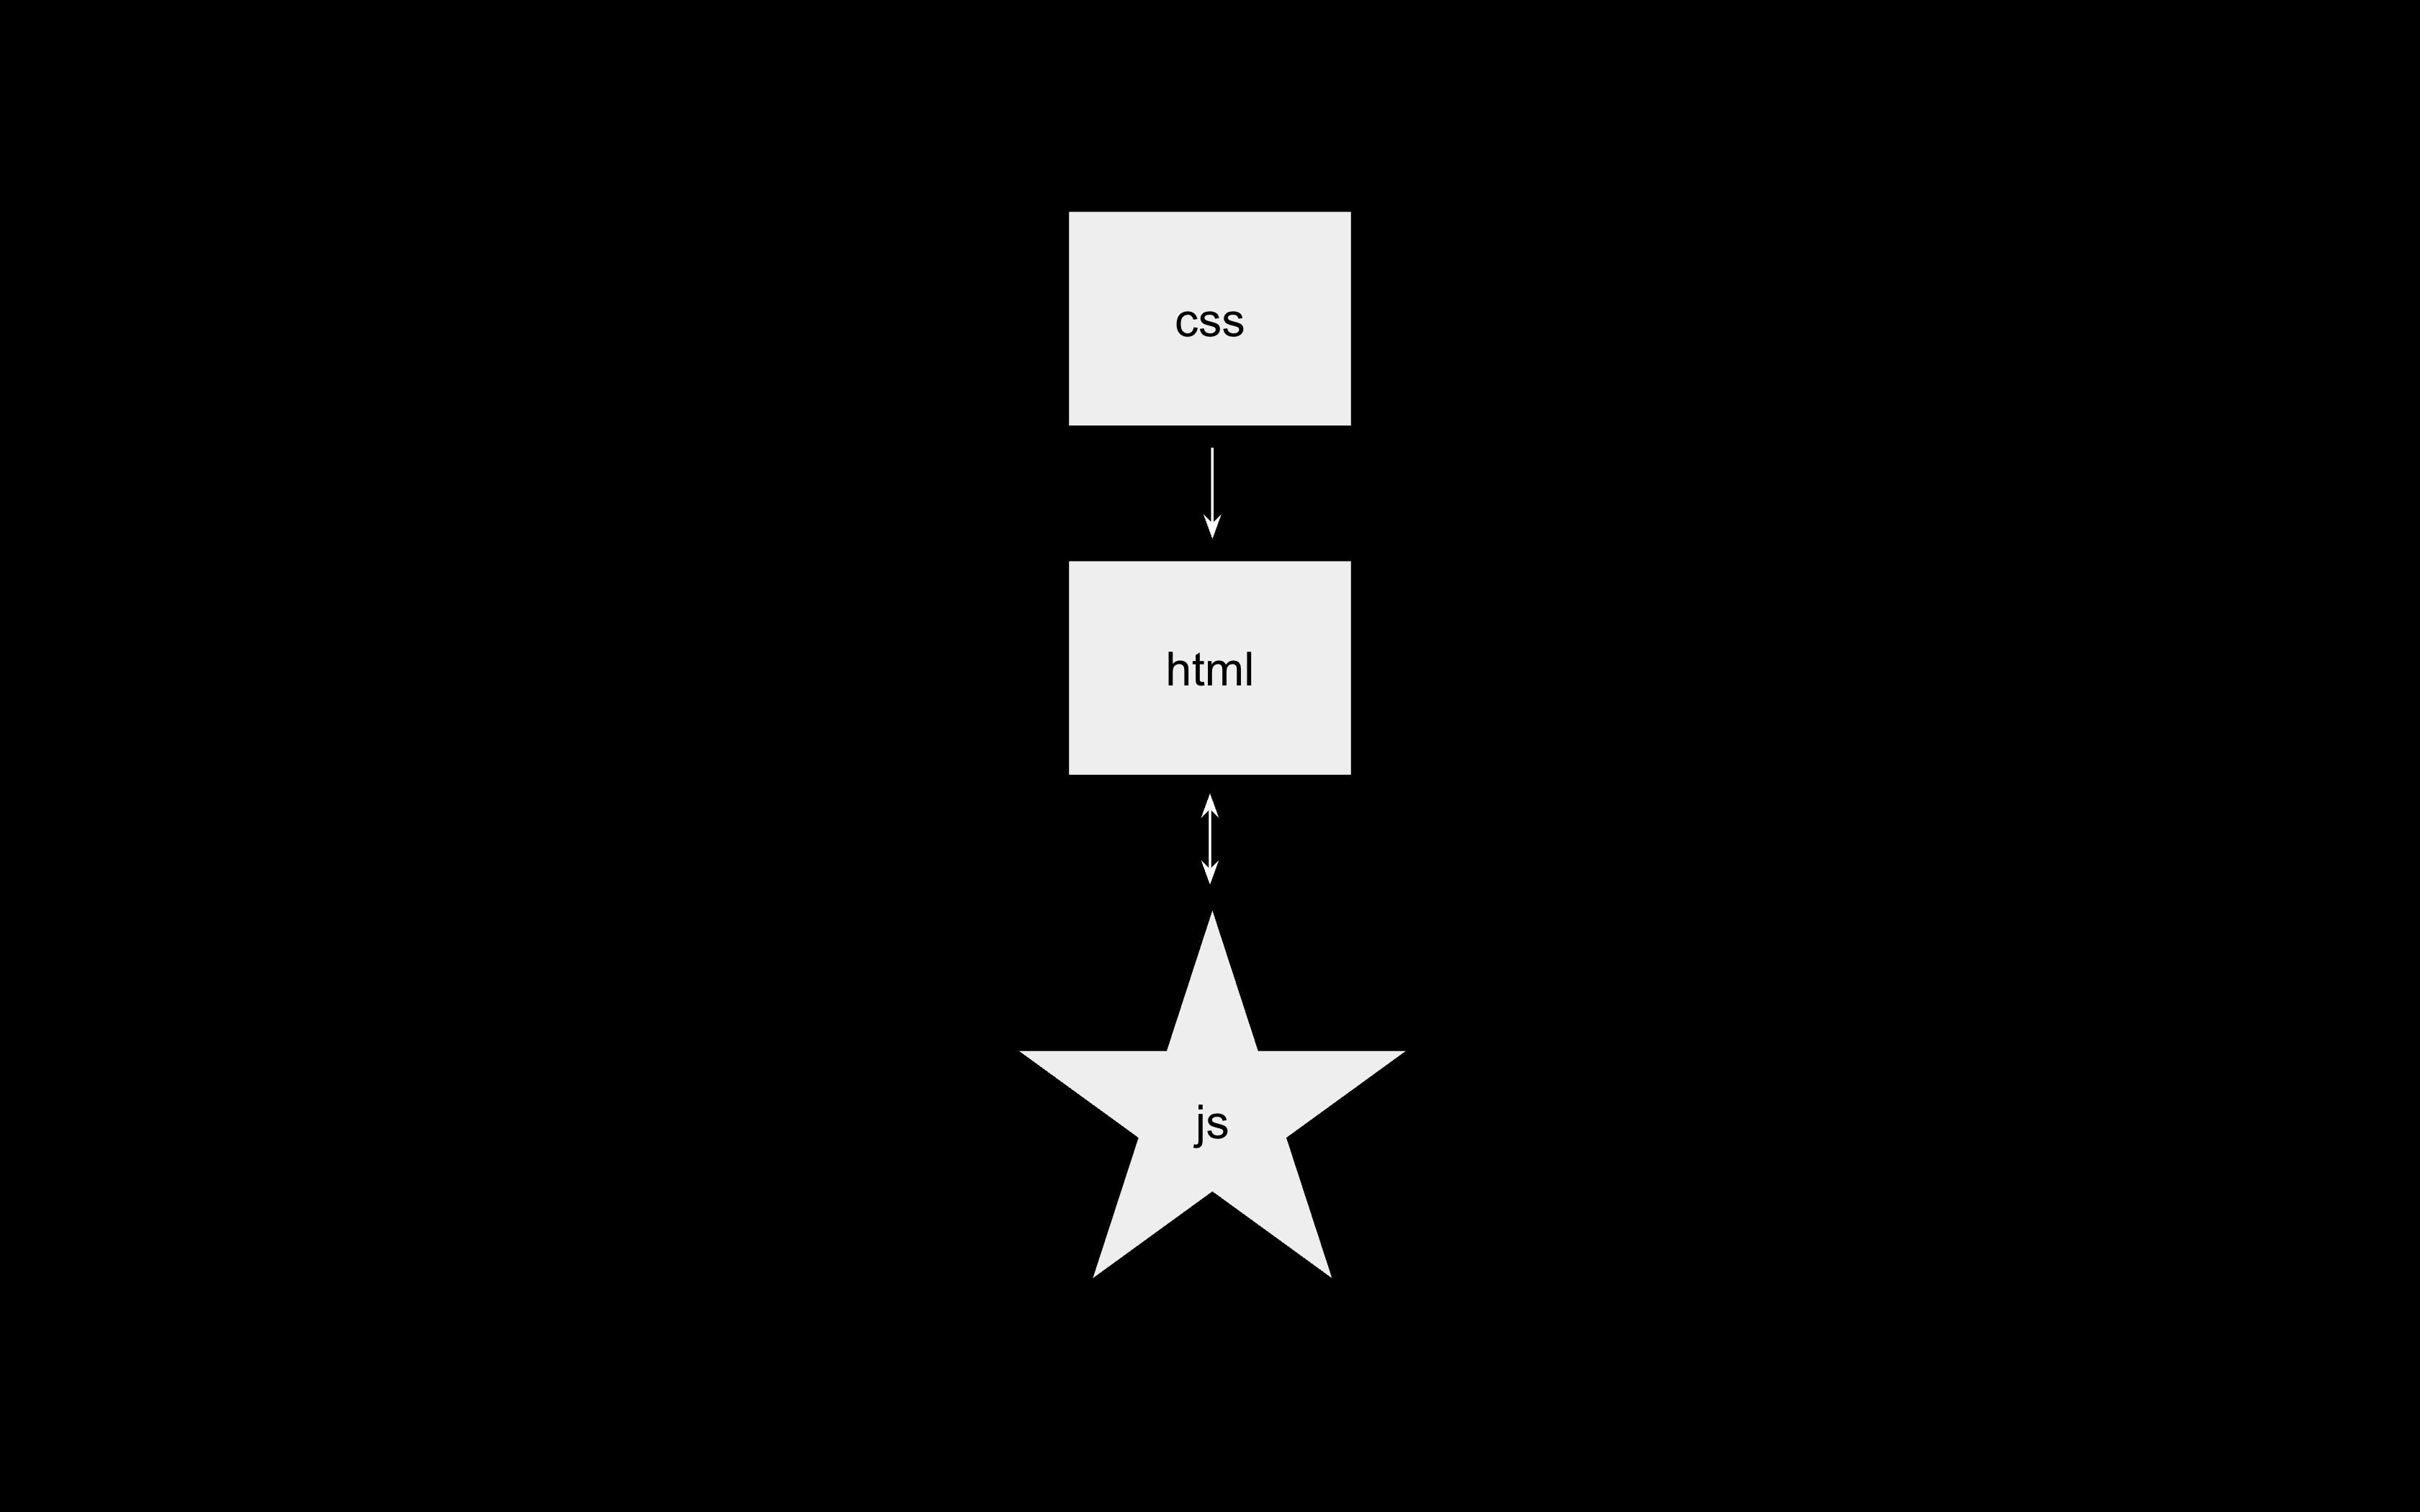 HTML CSS as squares, JS as star